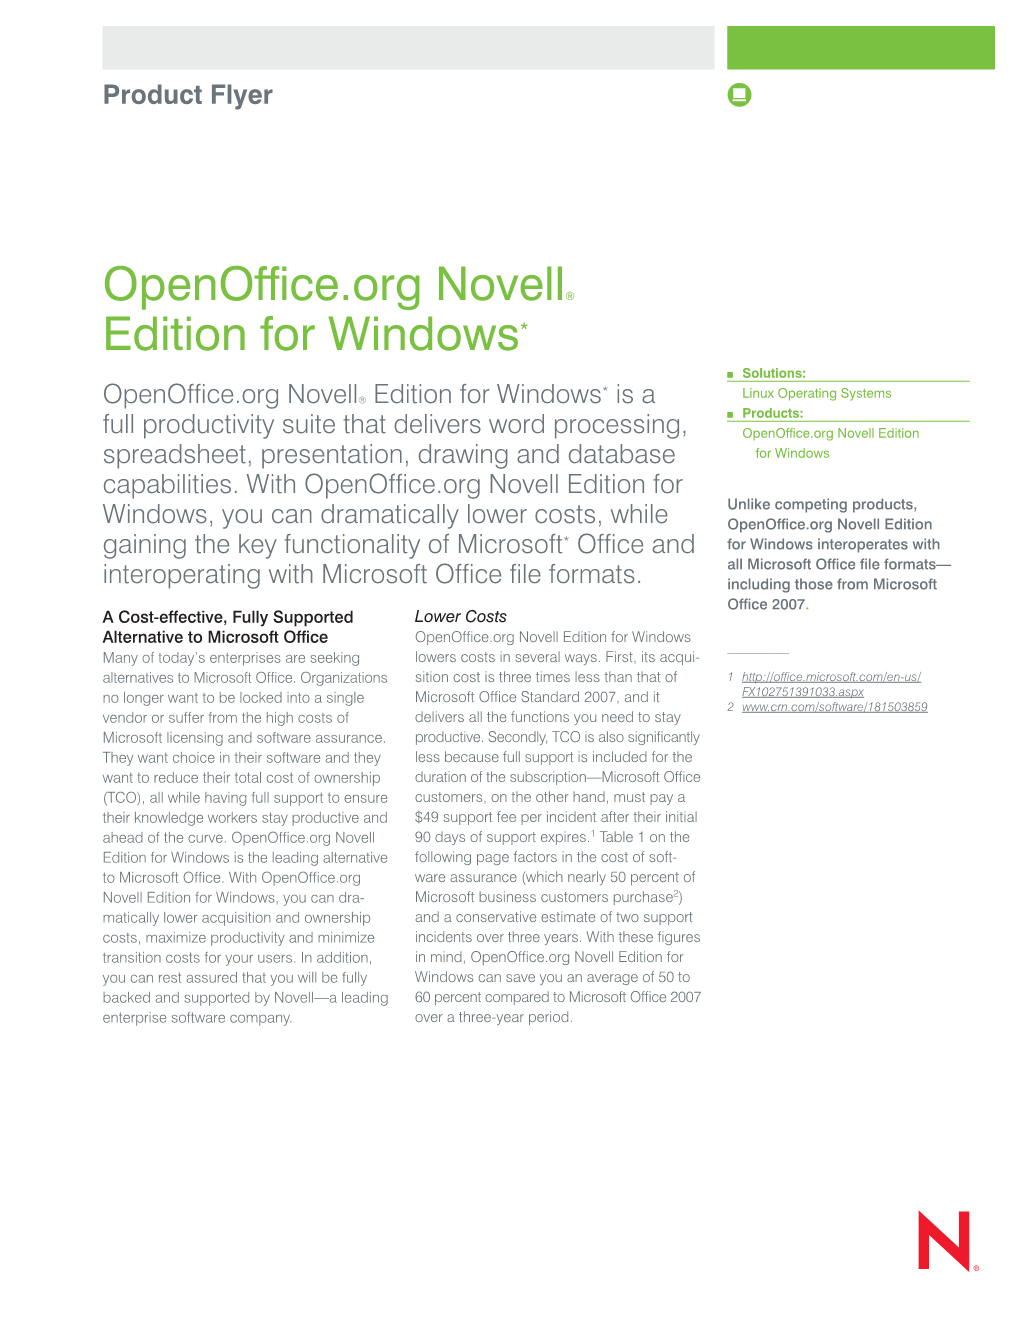 Openoffice.Org Novell® Edition for Windows*